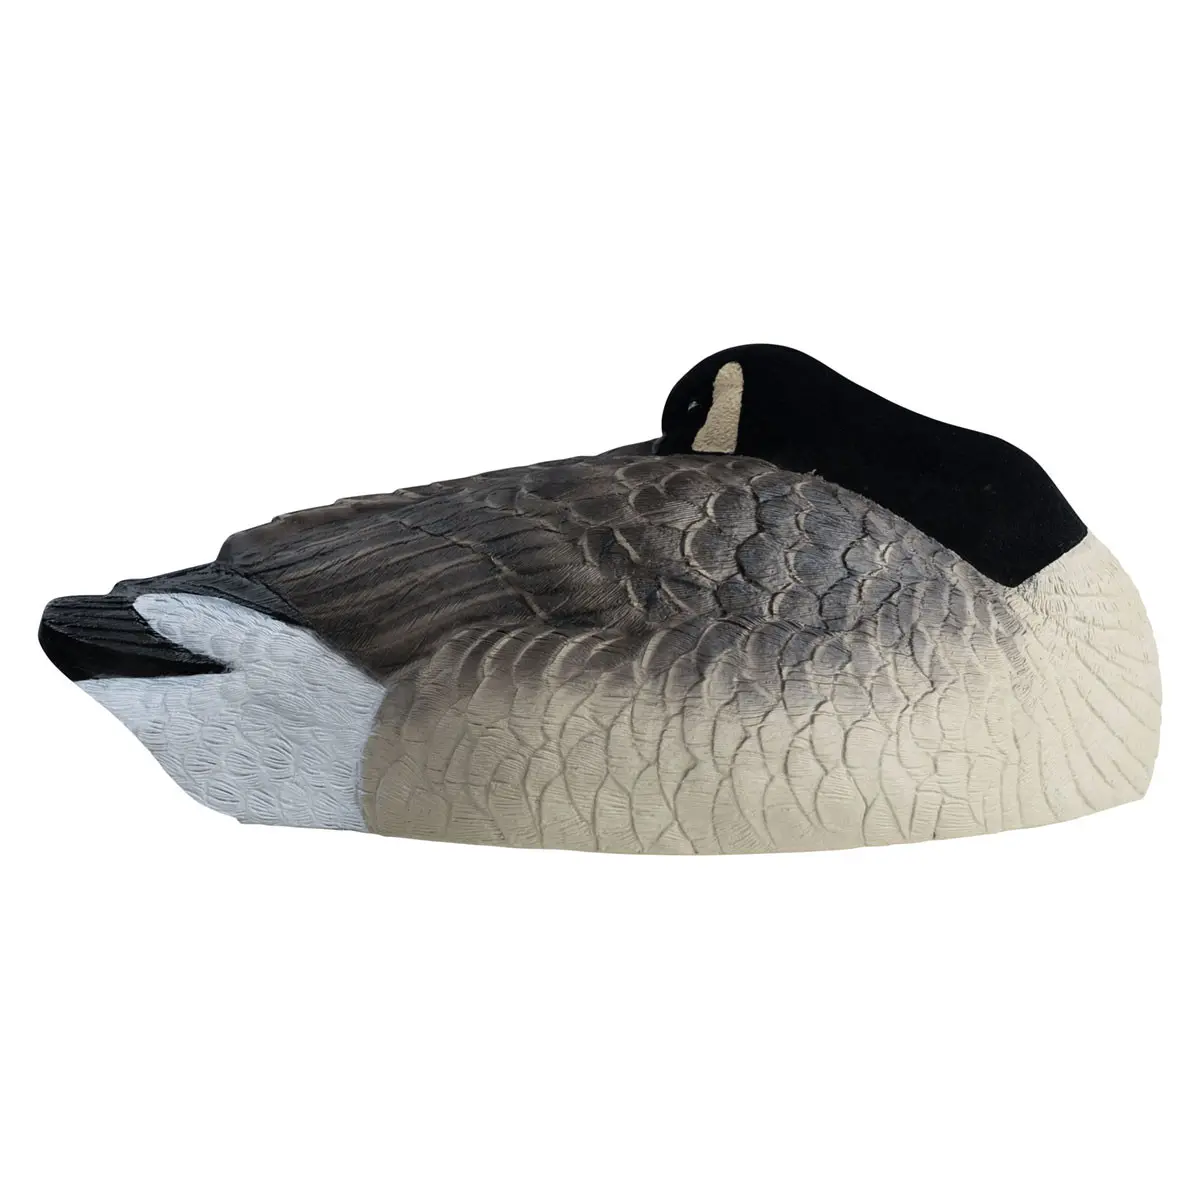 Rugged Series Canada Sleeper Shell Decoys - Flocked Head 6 Pack-right facing